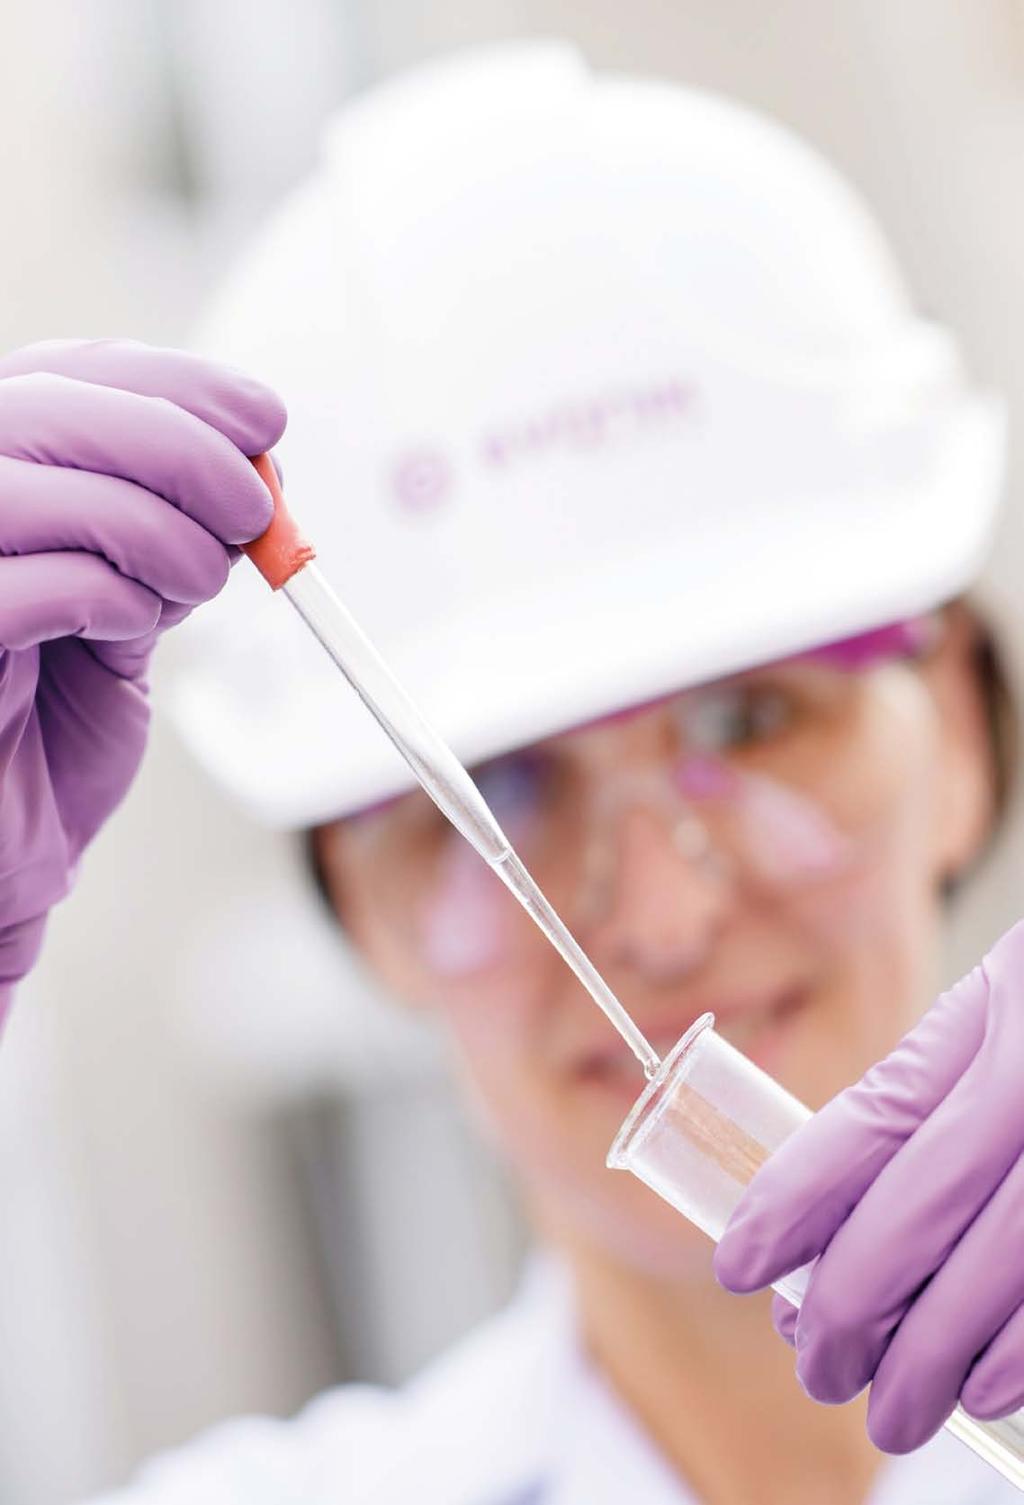 Evonik, the creative industrial group from Germany, is one of the world leaders in specialty chemicals.